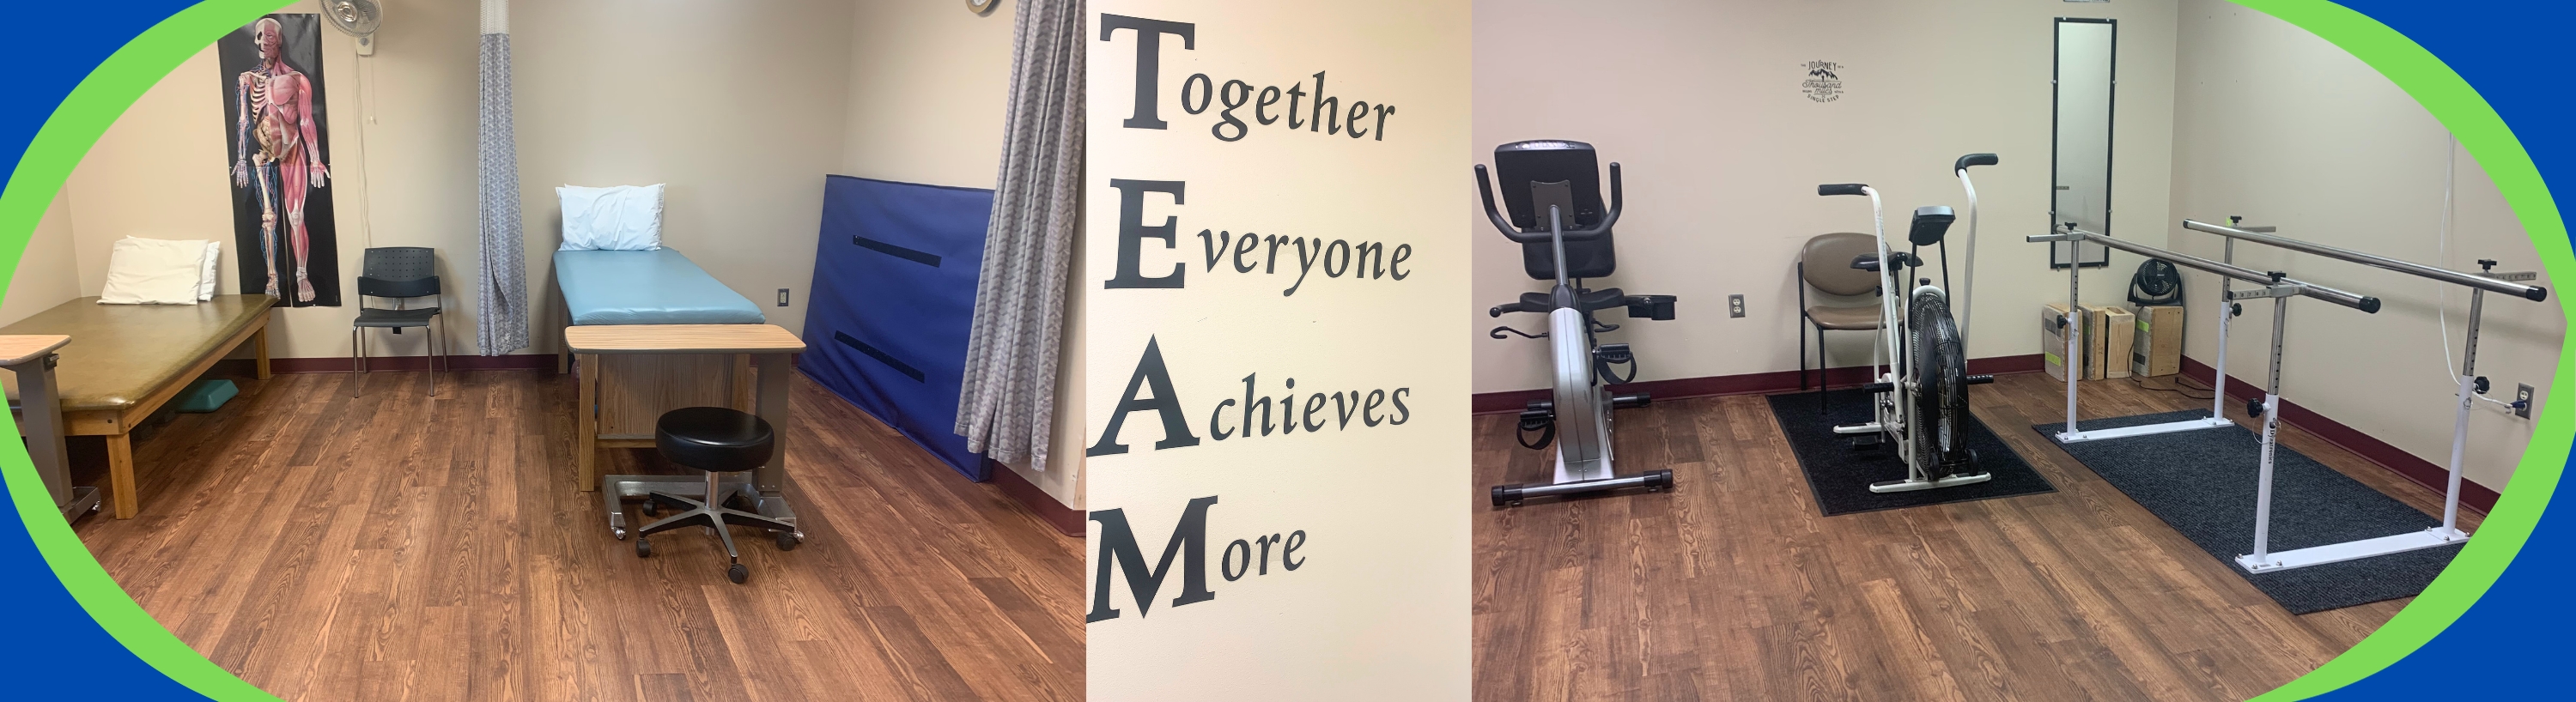 Together Everyone Achieves More

Physical Therapy Services